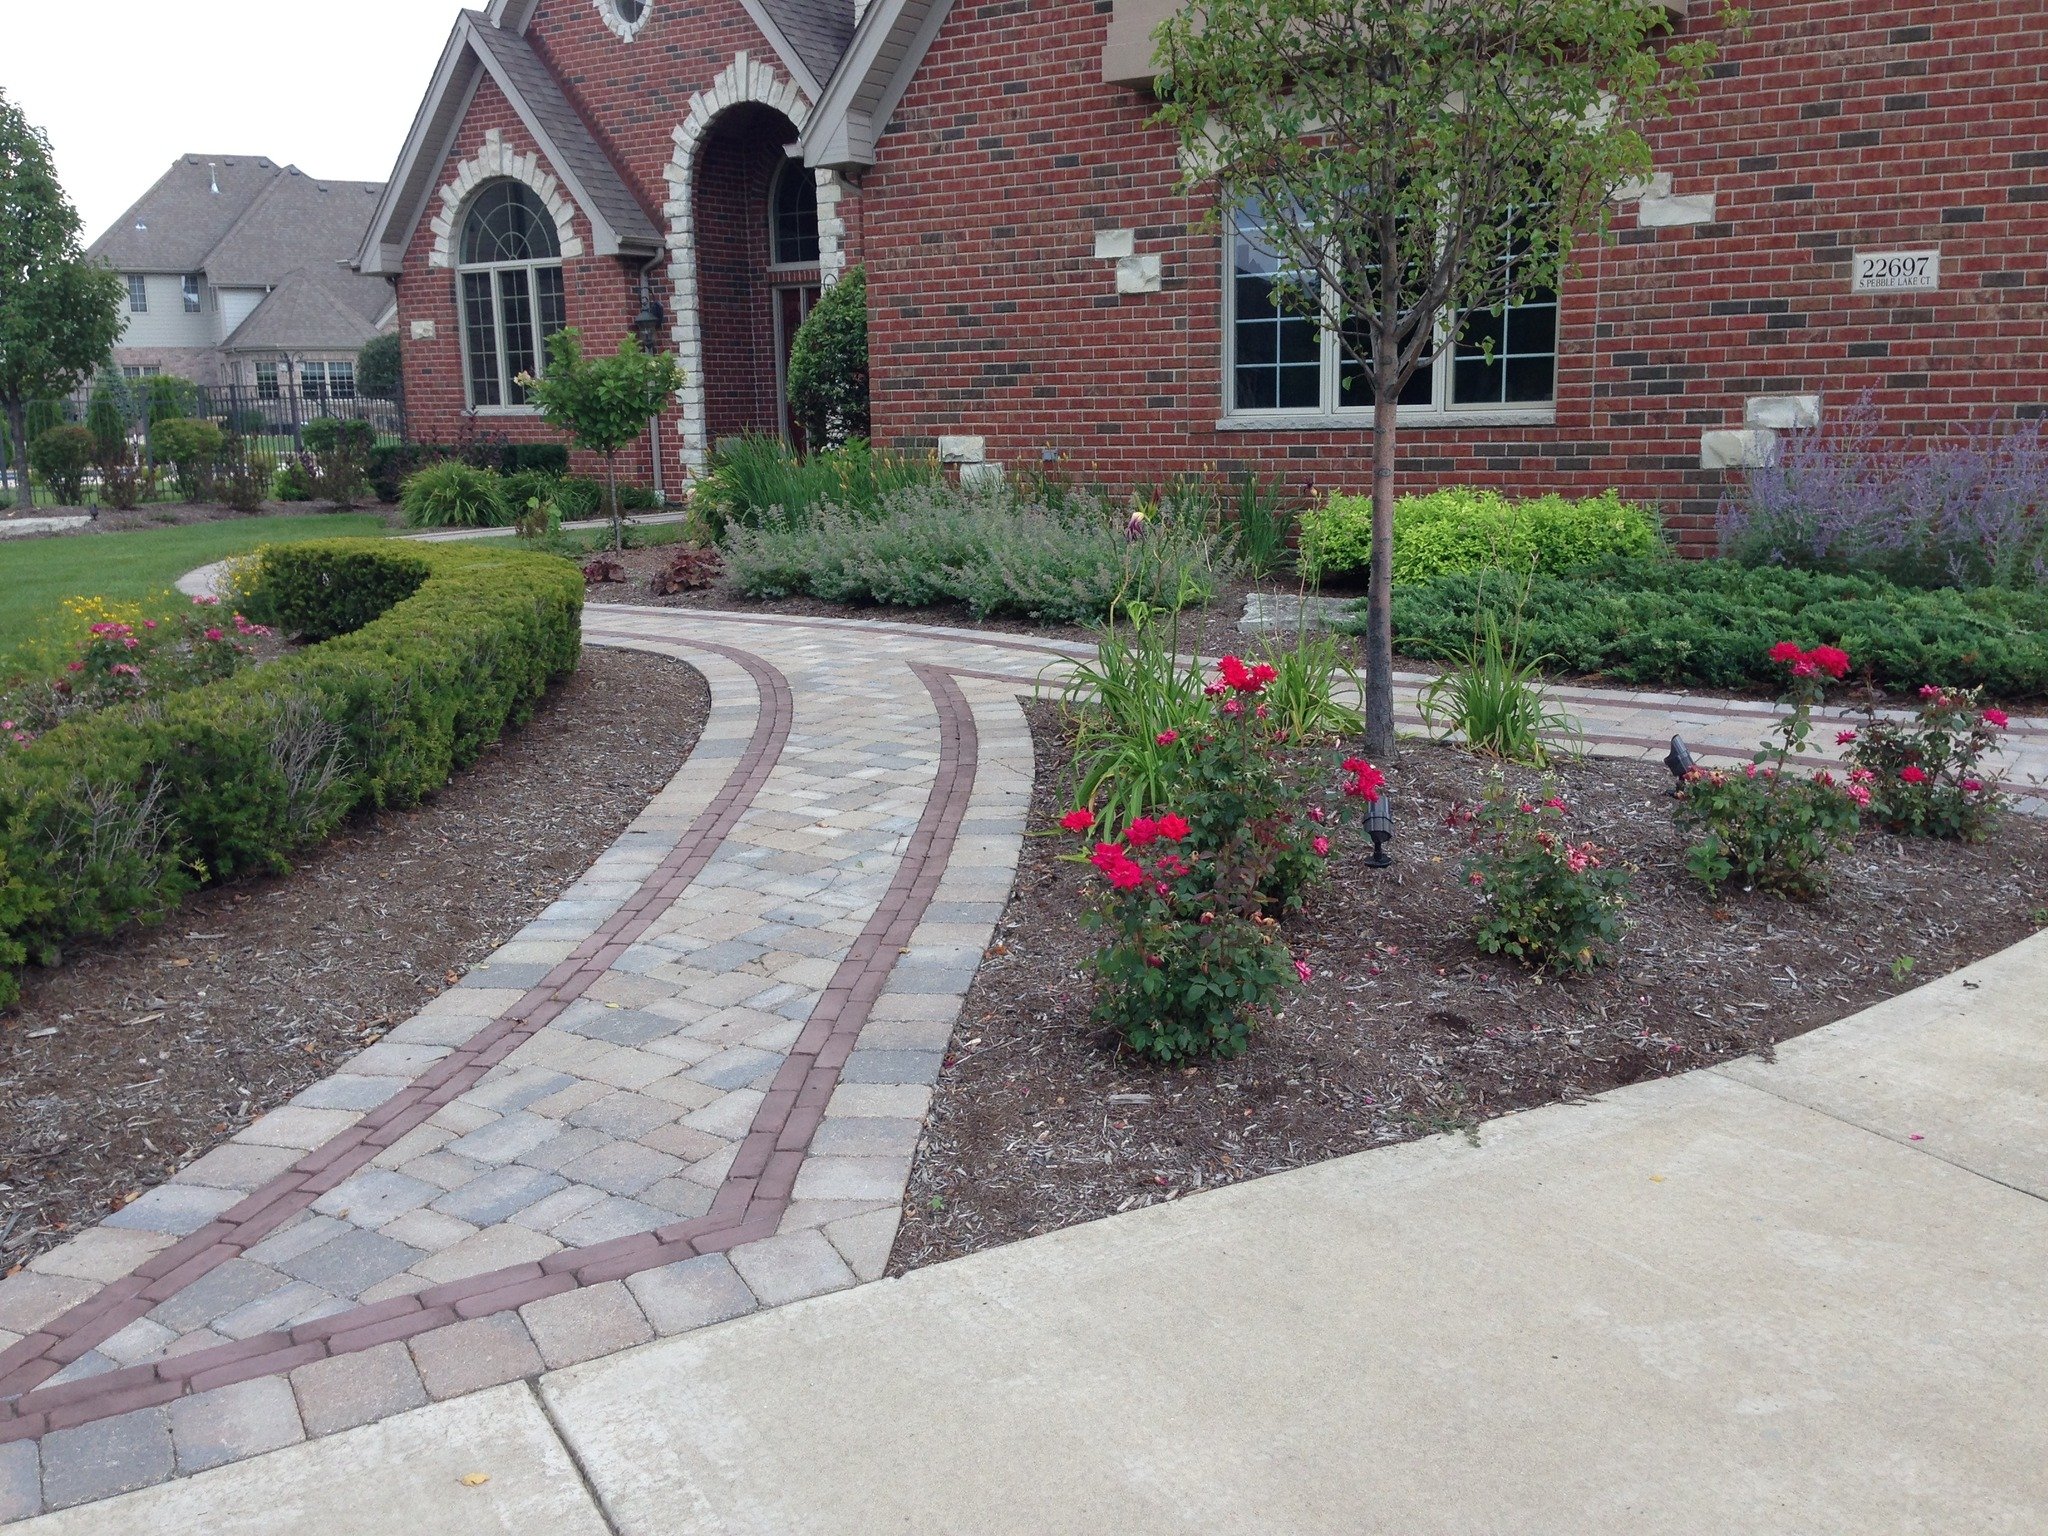 Turn your front walkway into a picturesque stroll for your visitors. They will feel at home before even setting foot in the door.